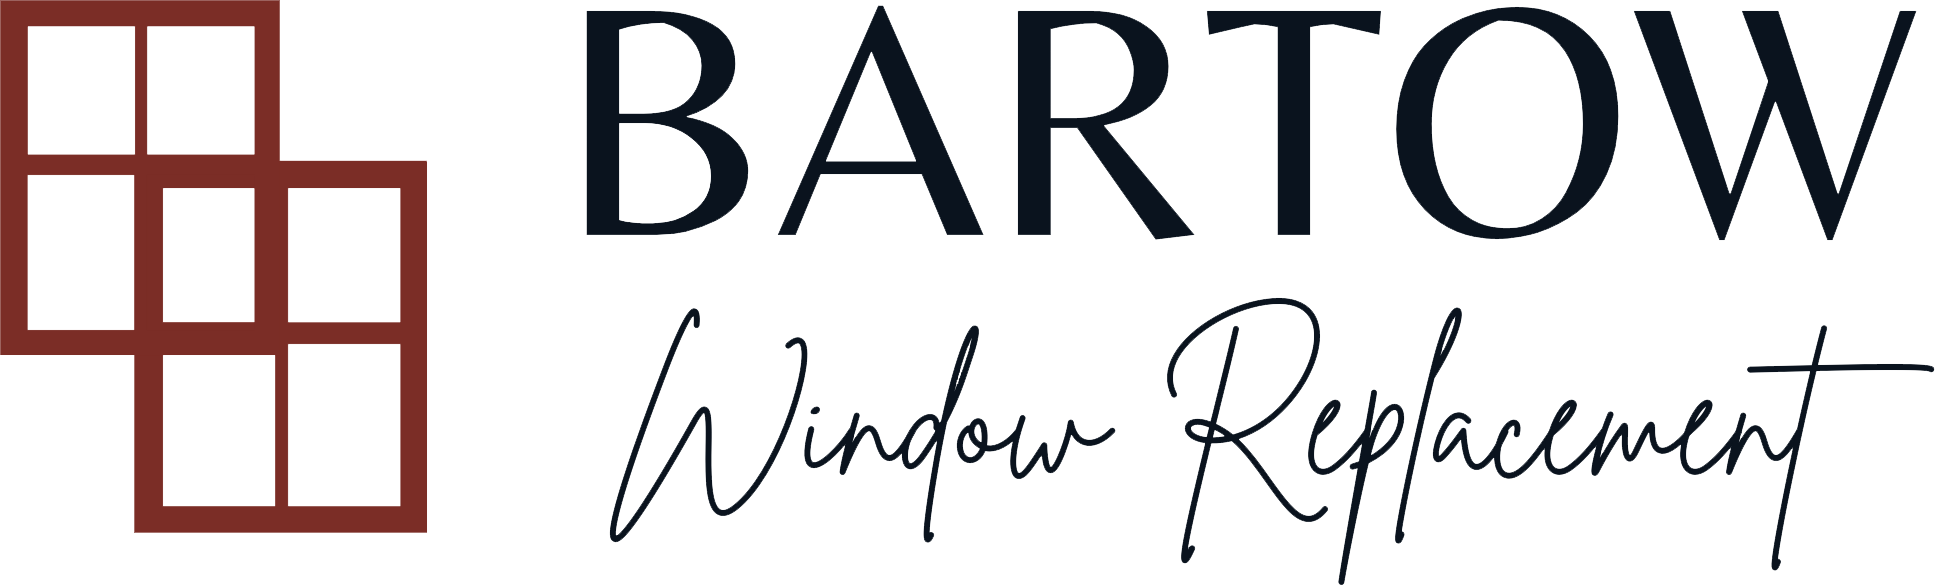 Bartow Window Replacement